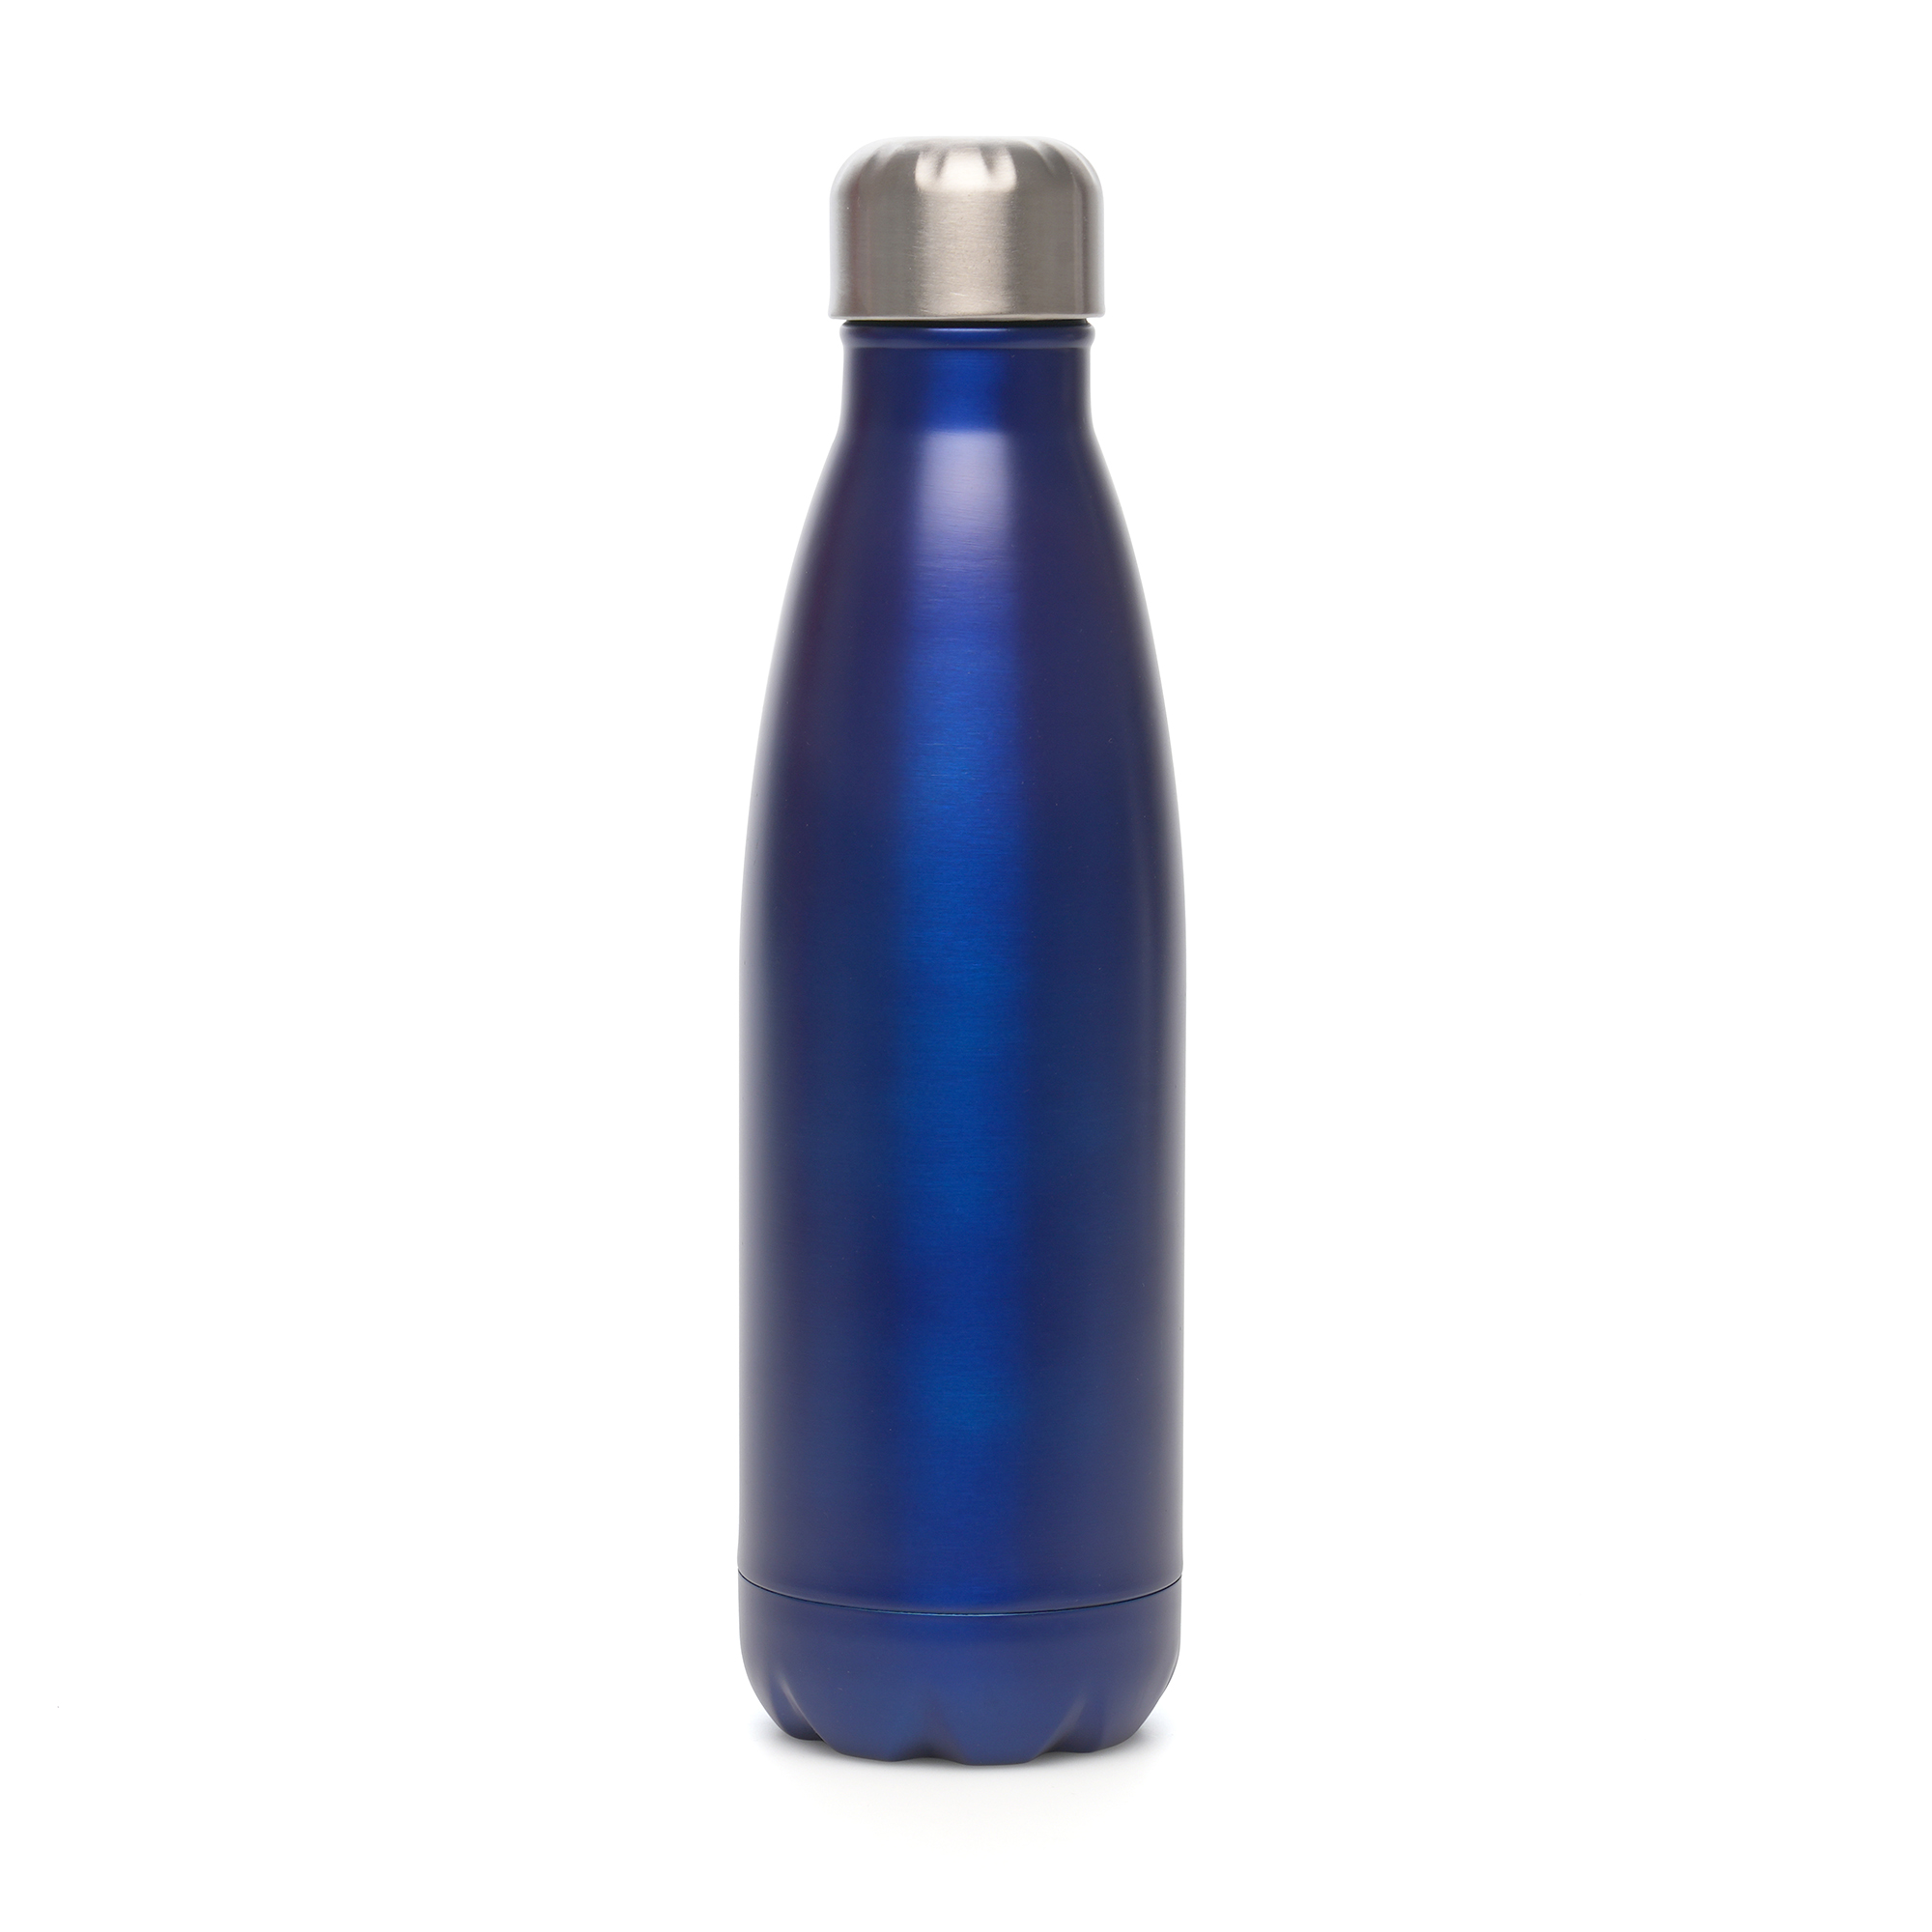 MG9333BL - REVIVE 650ml RPET AND RECYLCED STAINLESS STEEL DRINKS BOTTLE